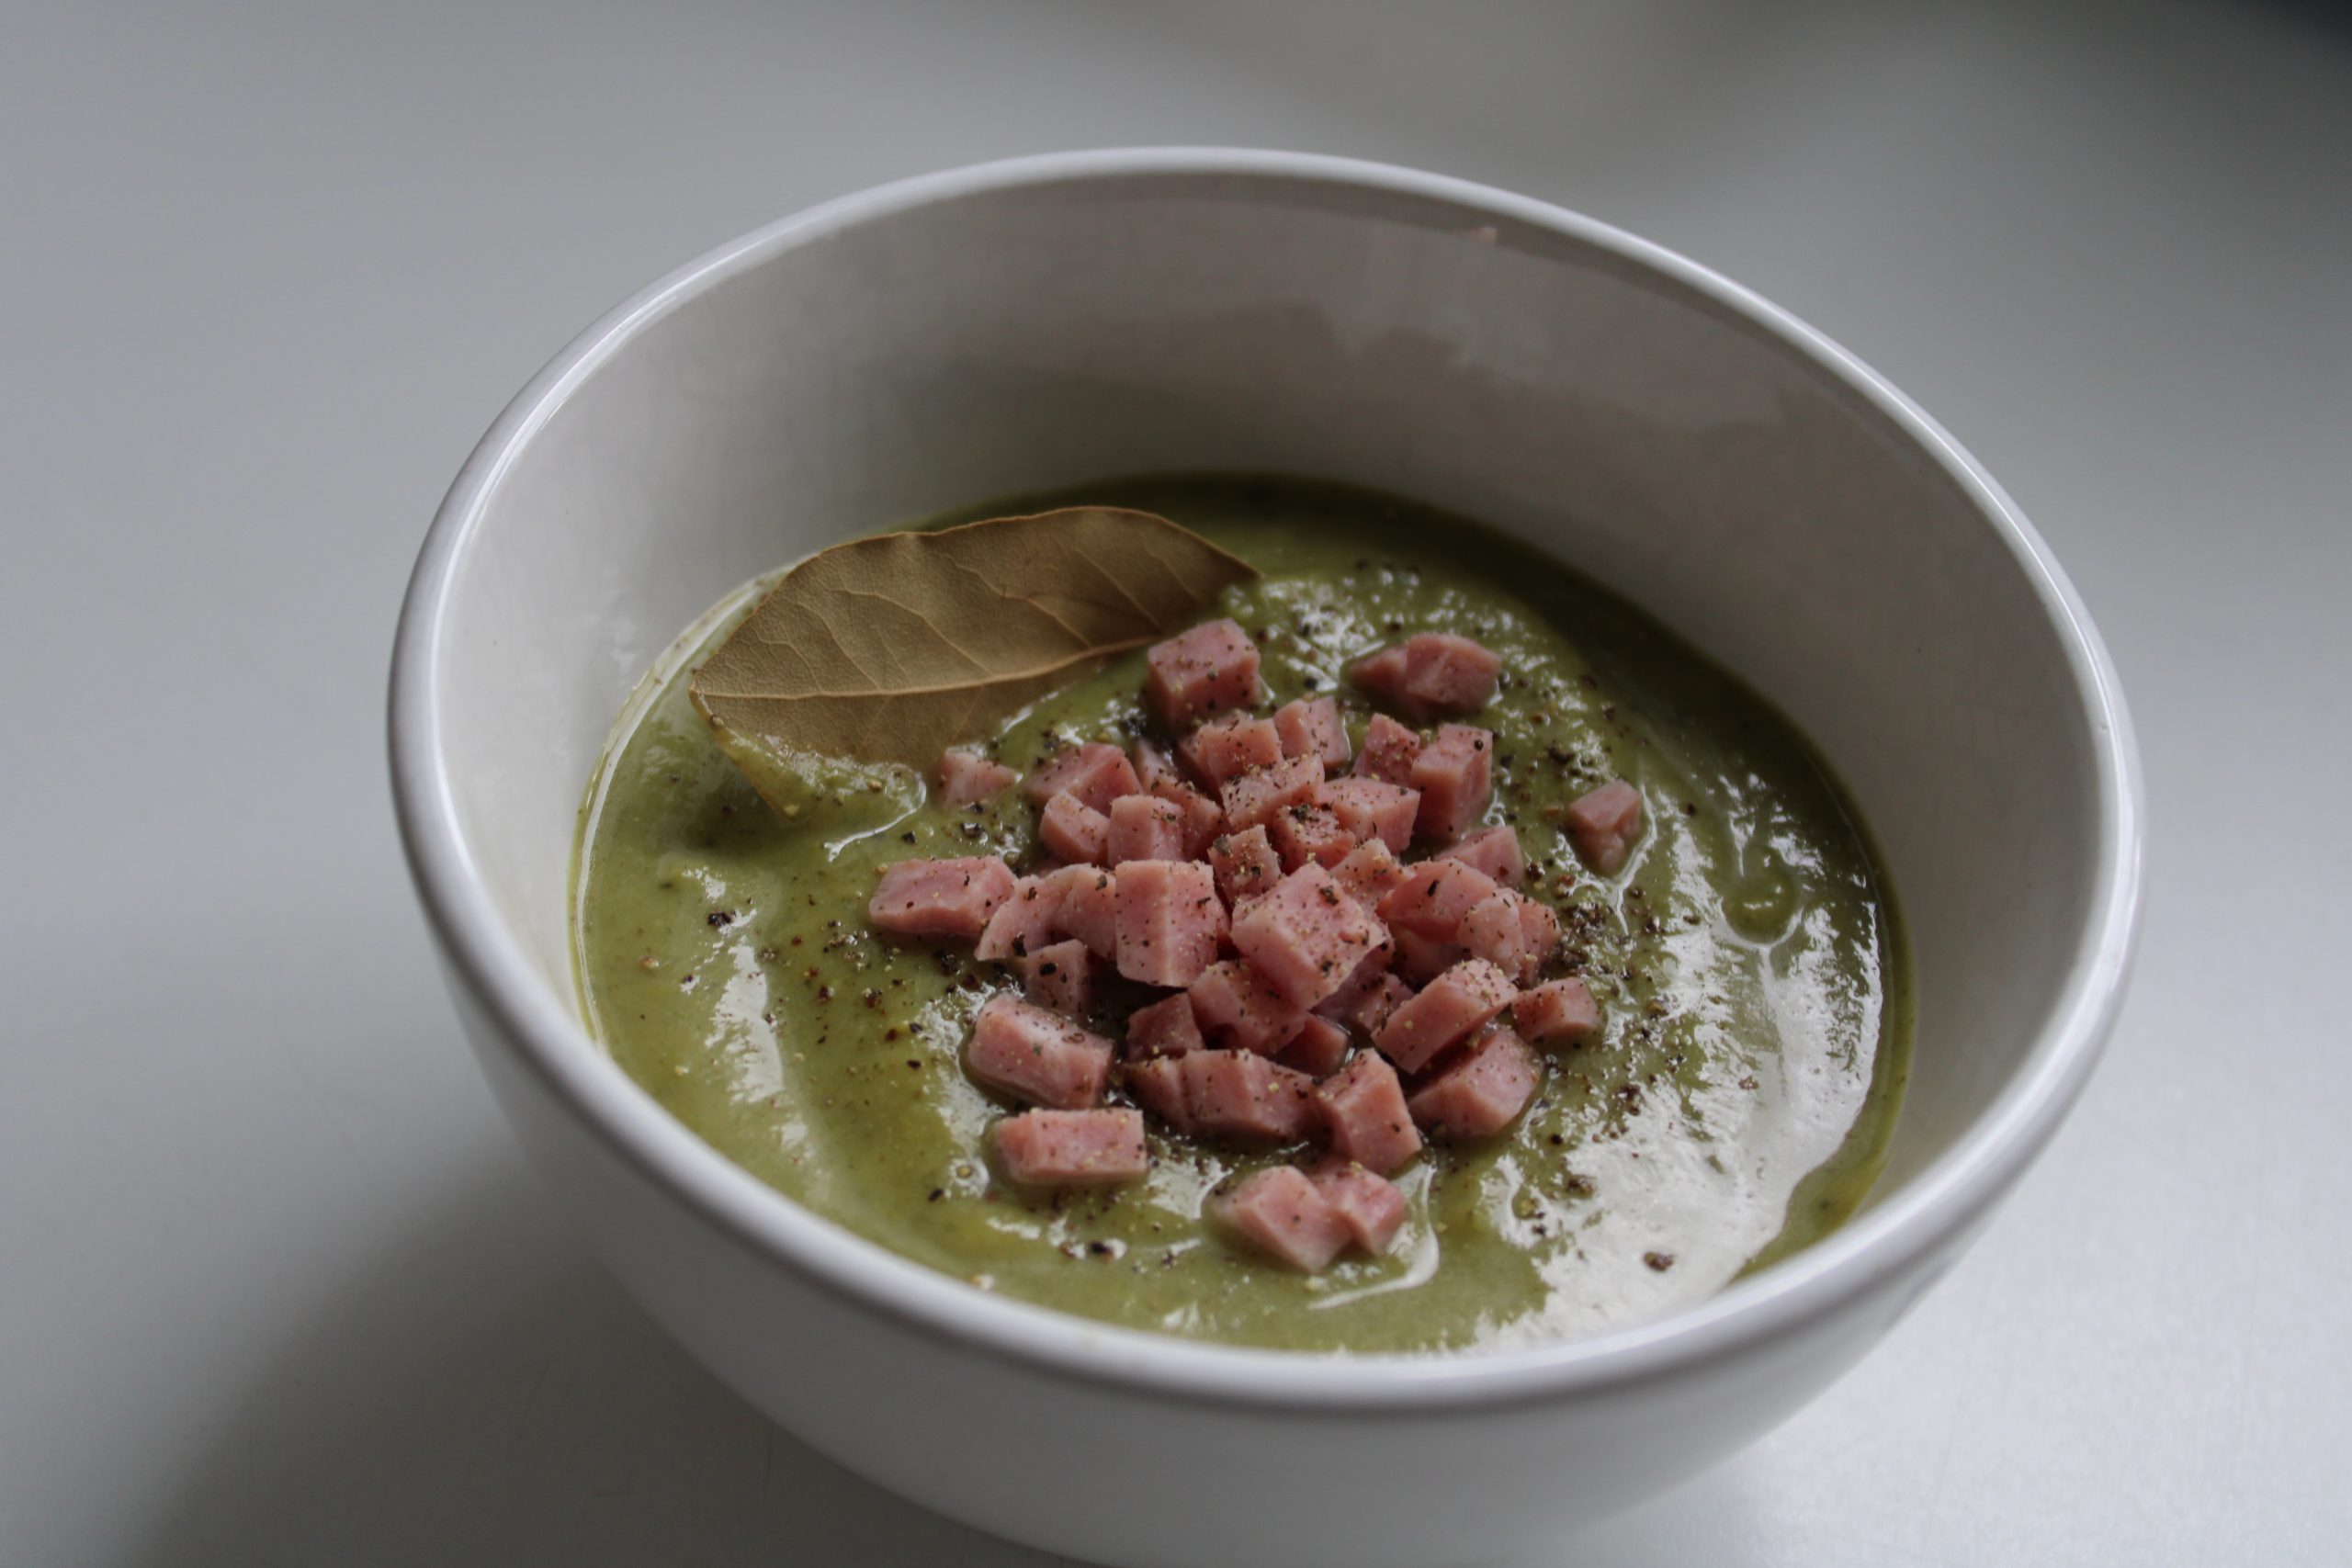 Broccoli soup finished with ham cubes